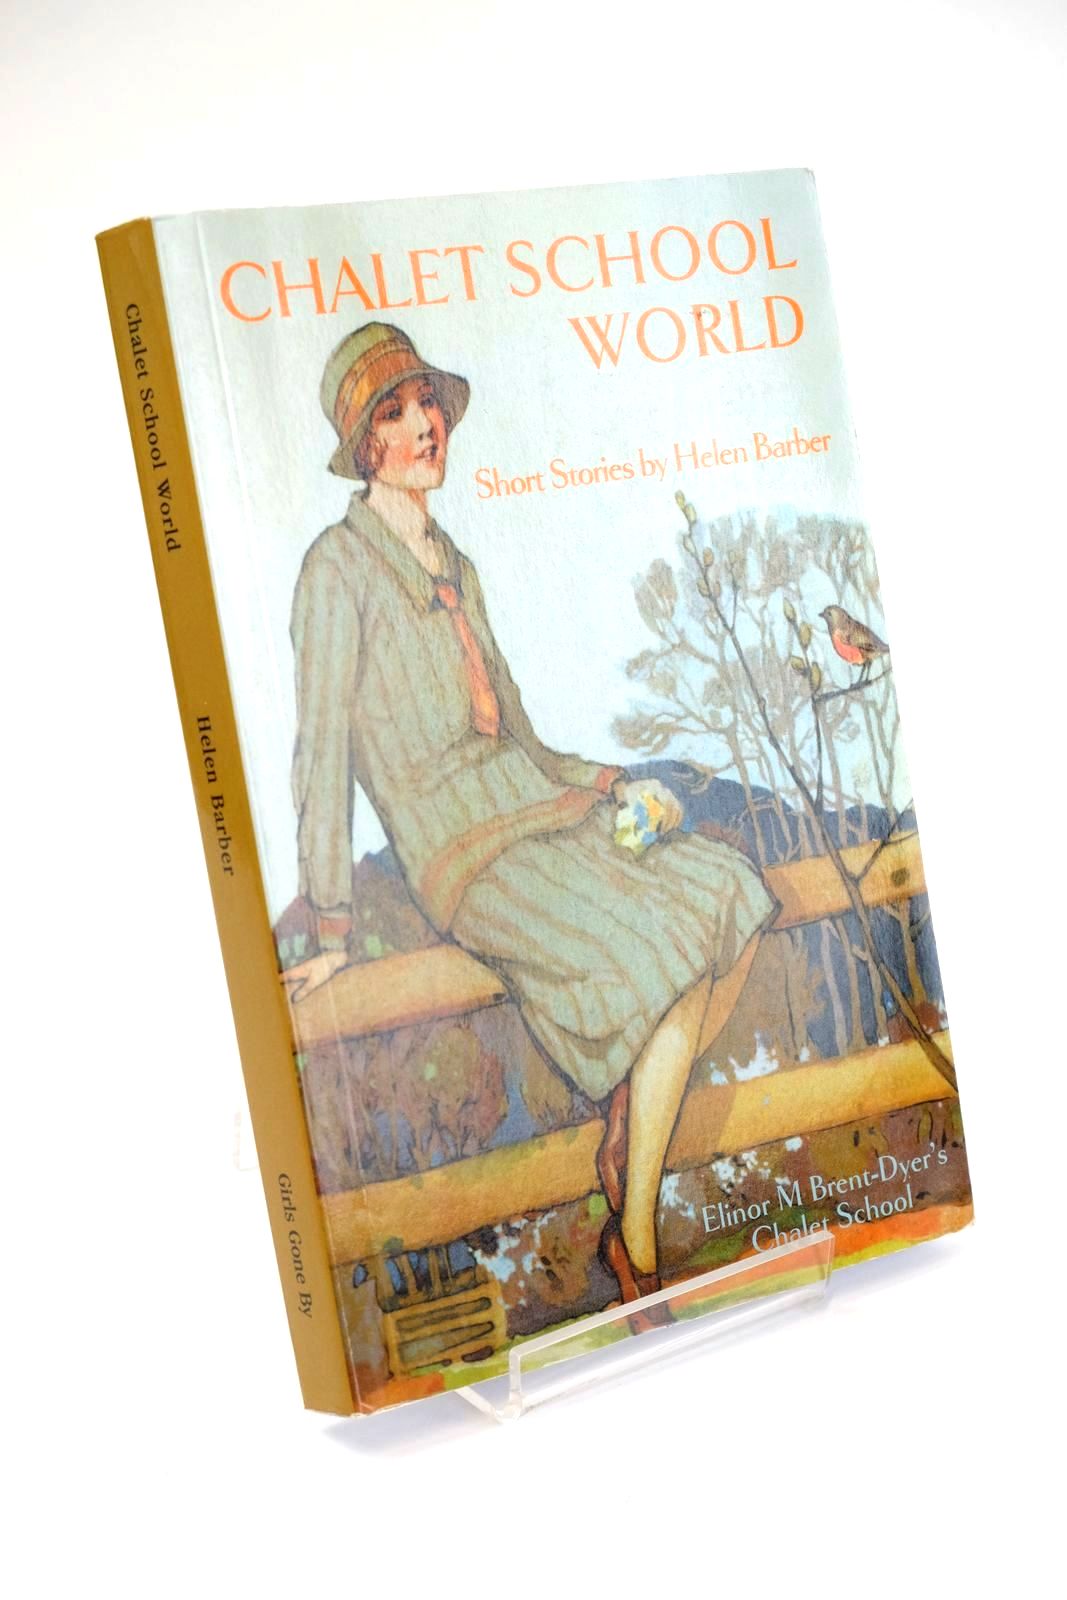 Photo of CHALET SCHOOL WORLD written by Brent-Dyer, Elinor M. Barber, Helen published by Girls Gone By (STOCK CODE: 1324153)  for sale by Stella & Rose's Books